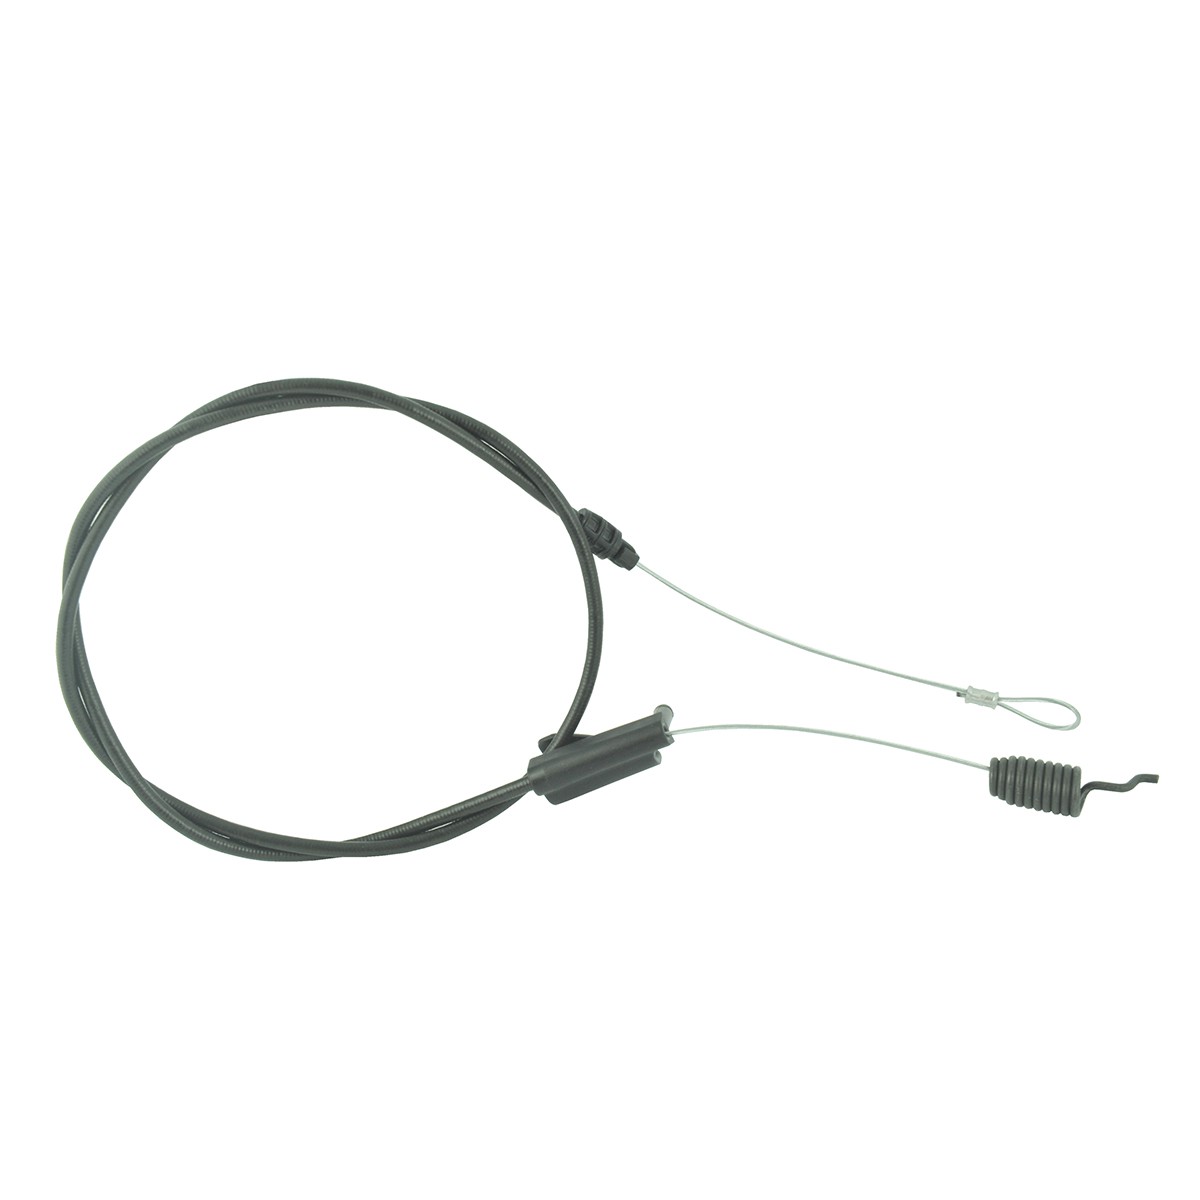 Drive cable for Cub Cadet CC / SC / LM2 / LM3 / LMR3 / 746-05121A petrol lawn mower